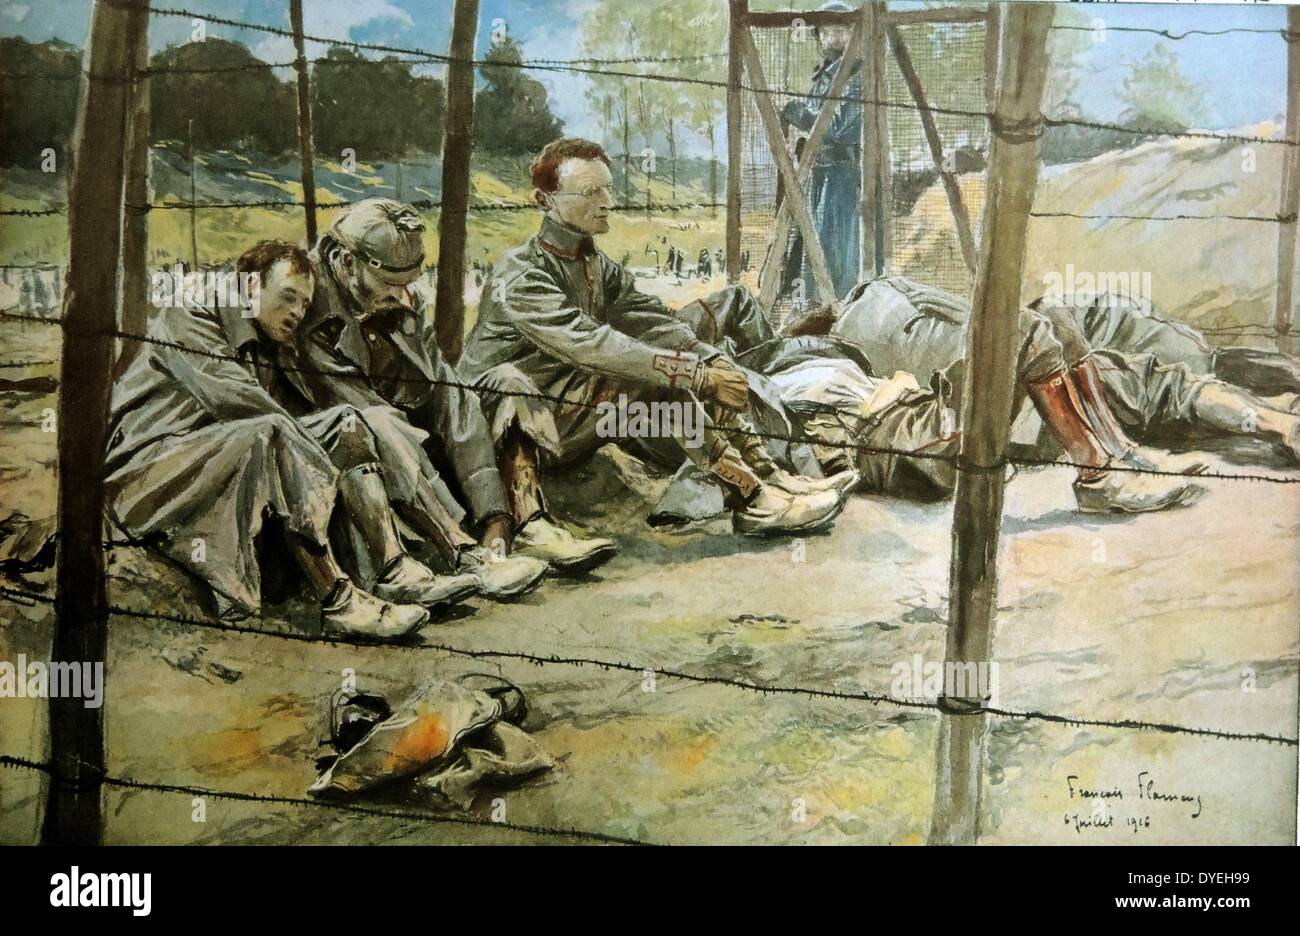 World War 1 - German officers, as prisoners of war in a French prison camp after the Battle of the Somme. Painting by Francois Flameng 1916. Stock Photo